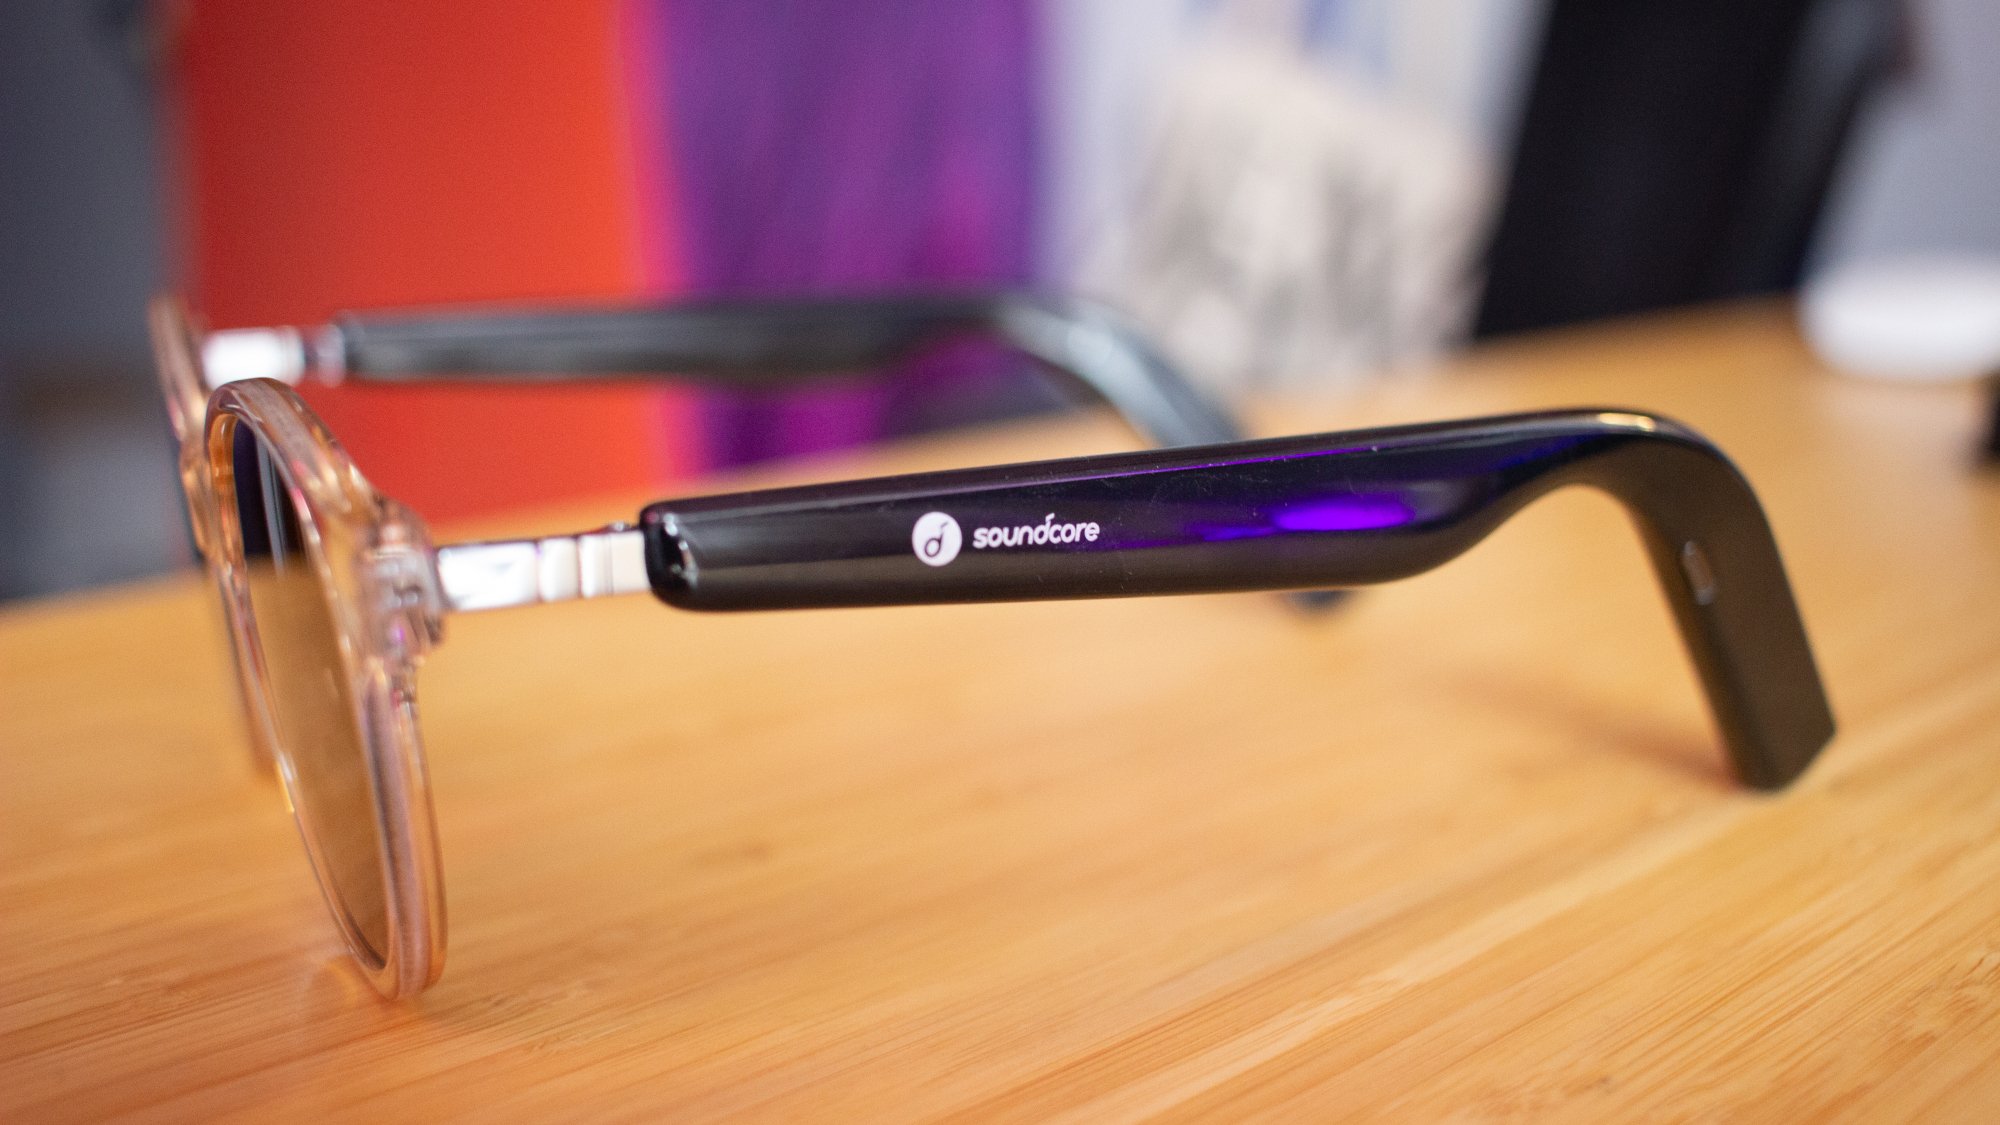 A pair of sunglasses open on a table viewed from the side